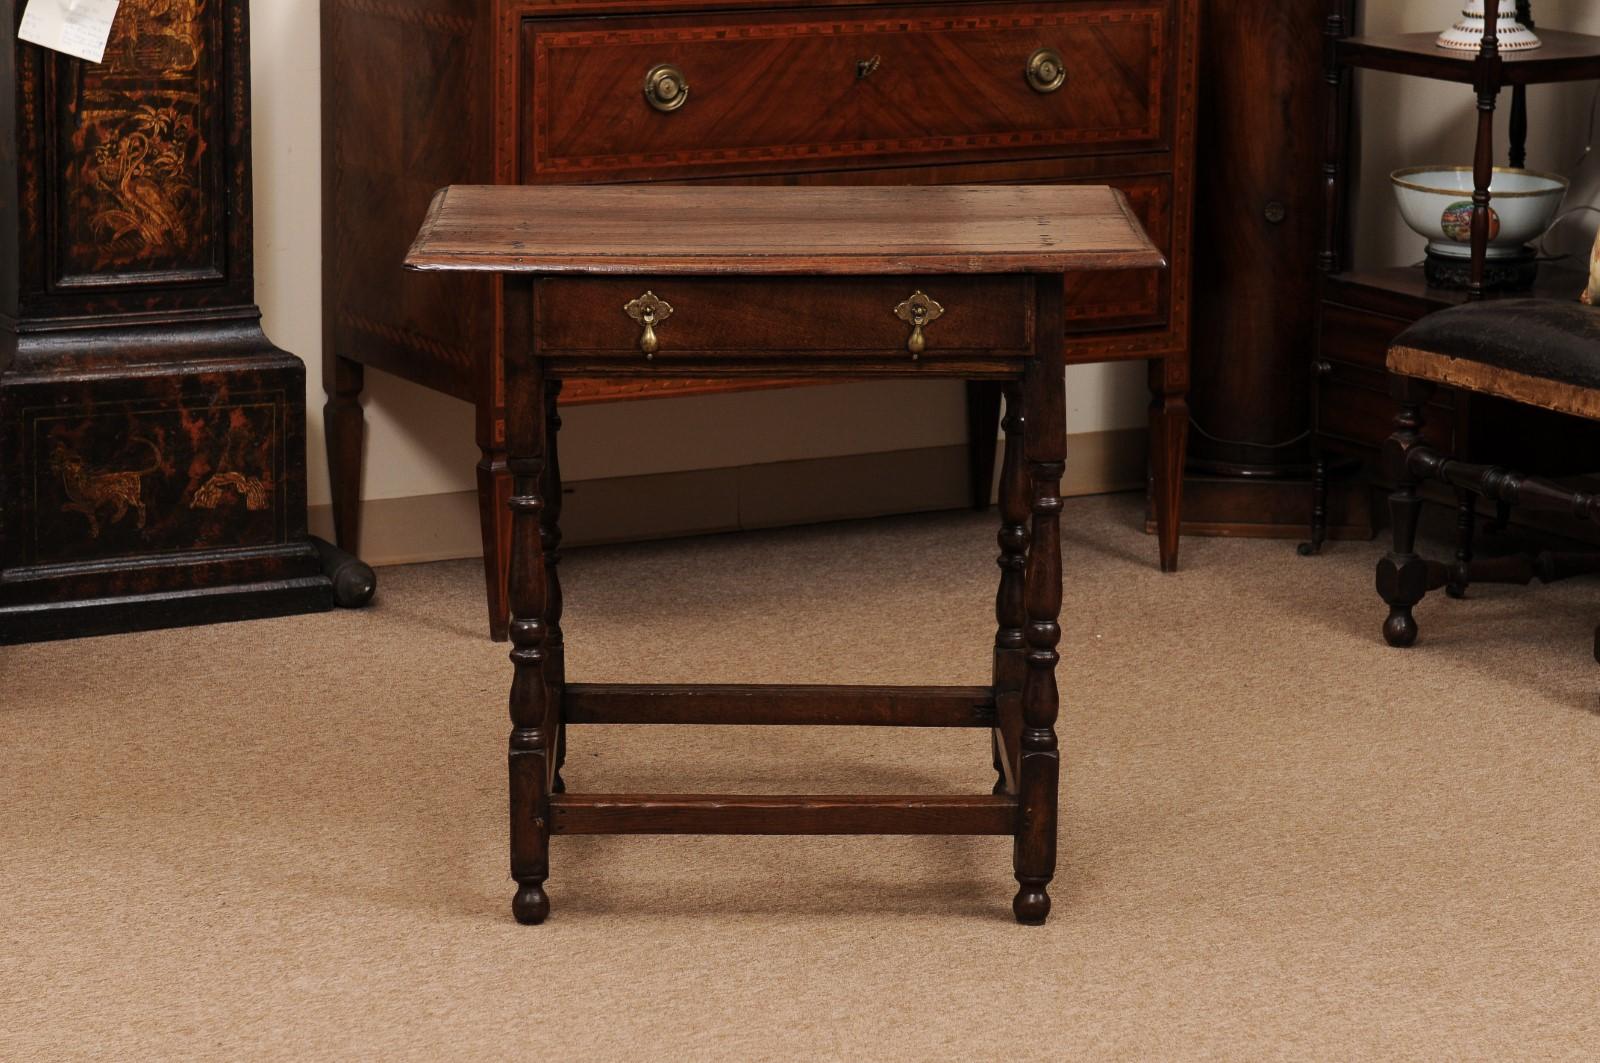 English 18th century Side Table with 1 Drawer, Turned Legs & Box Stretcher 10